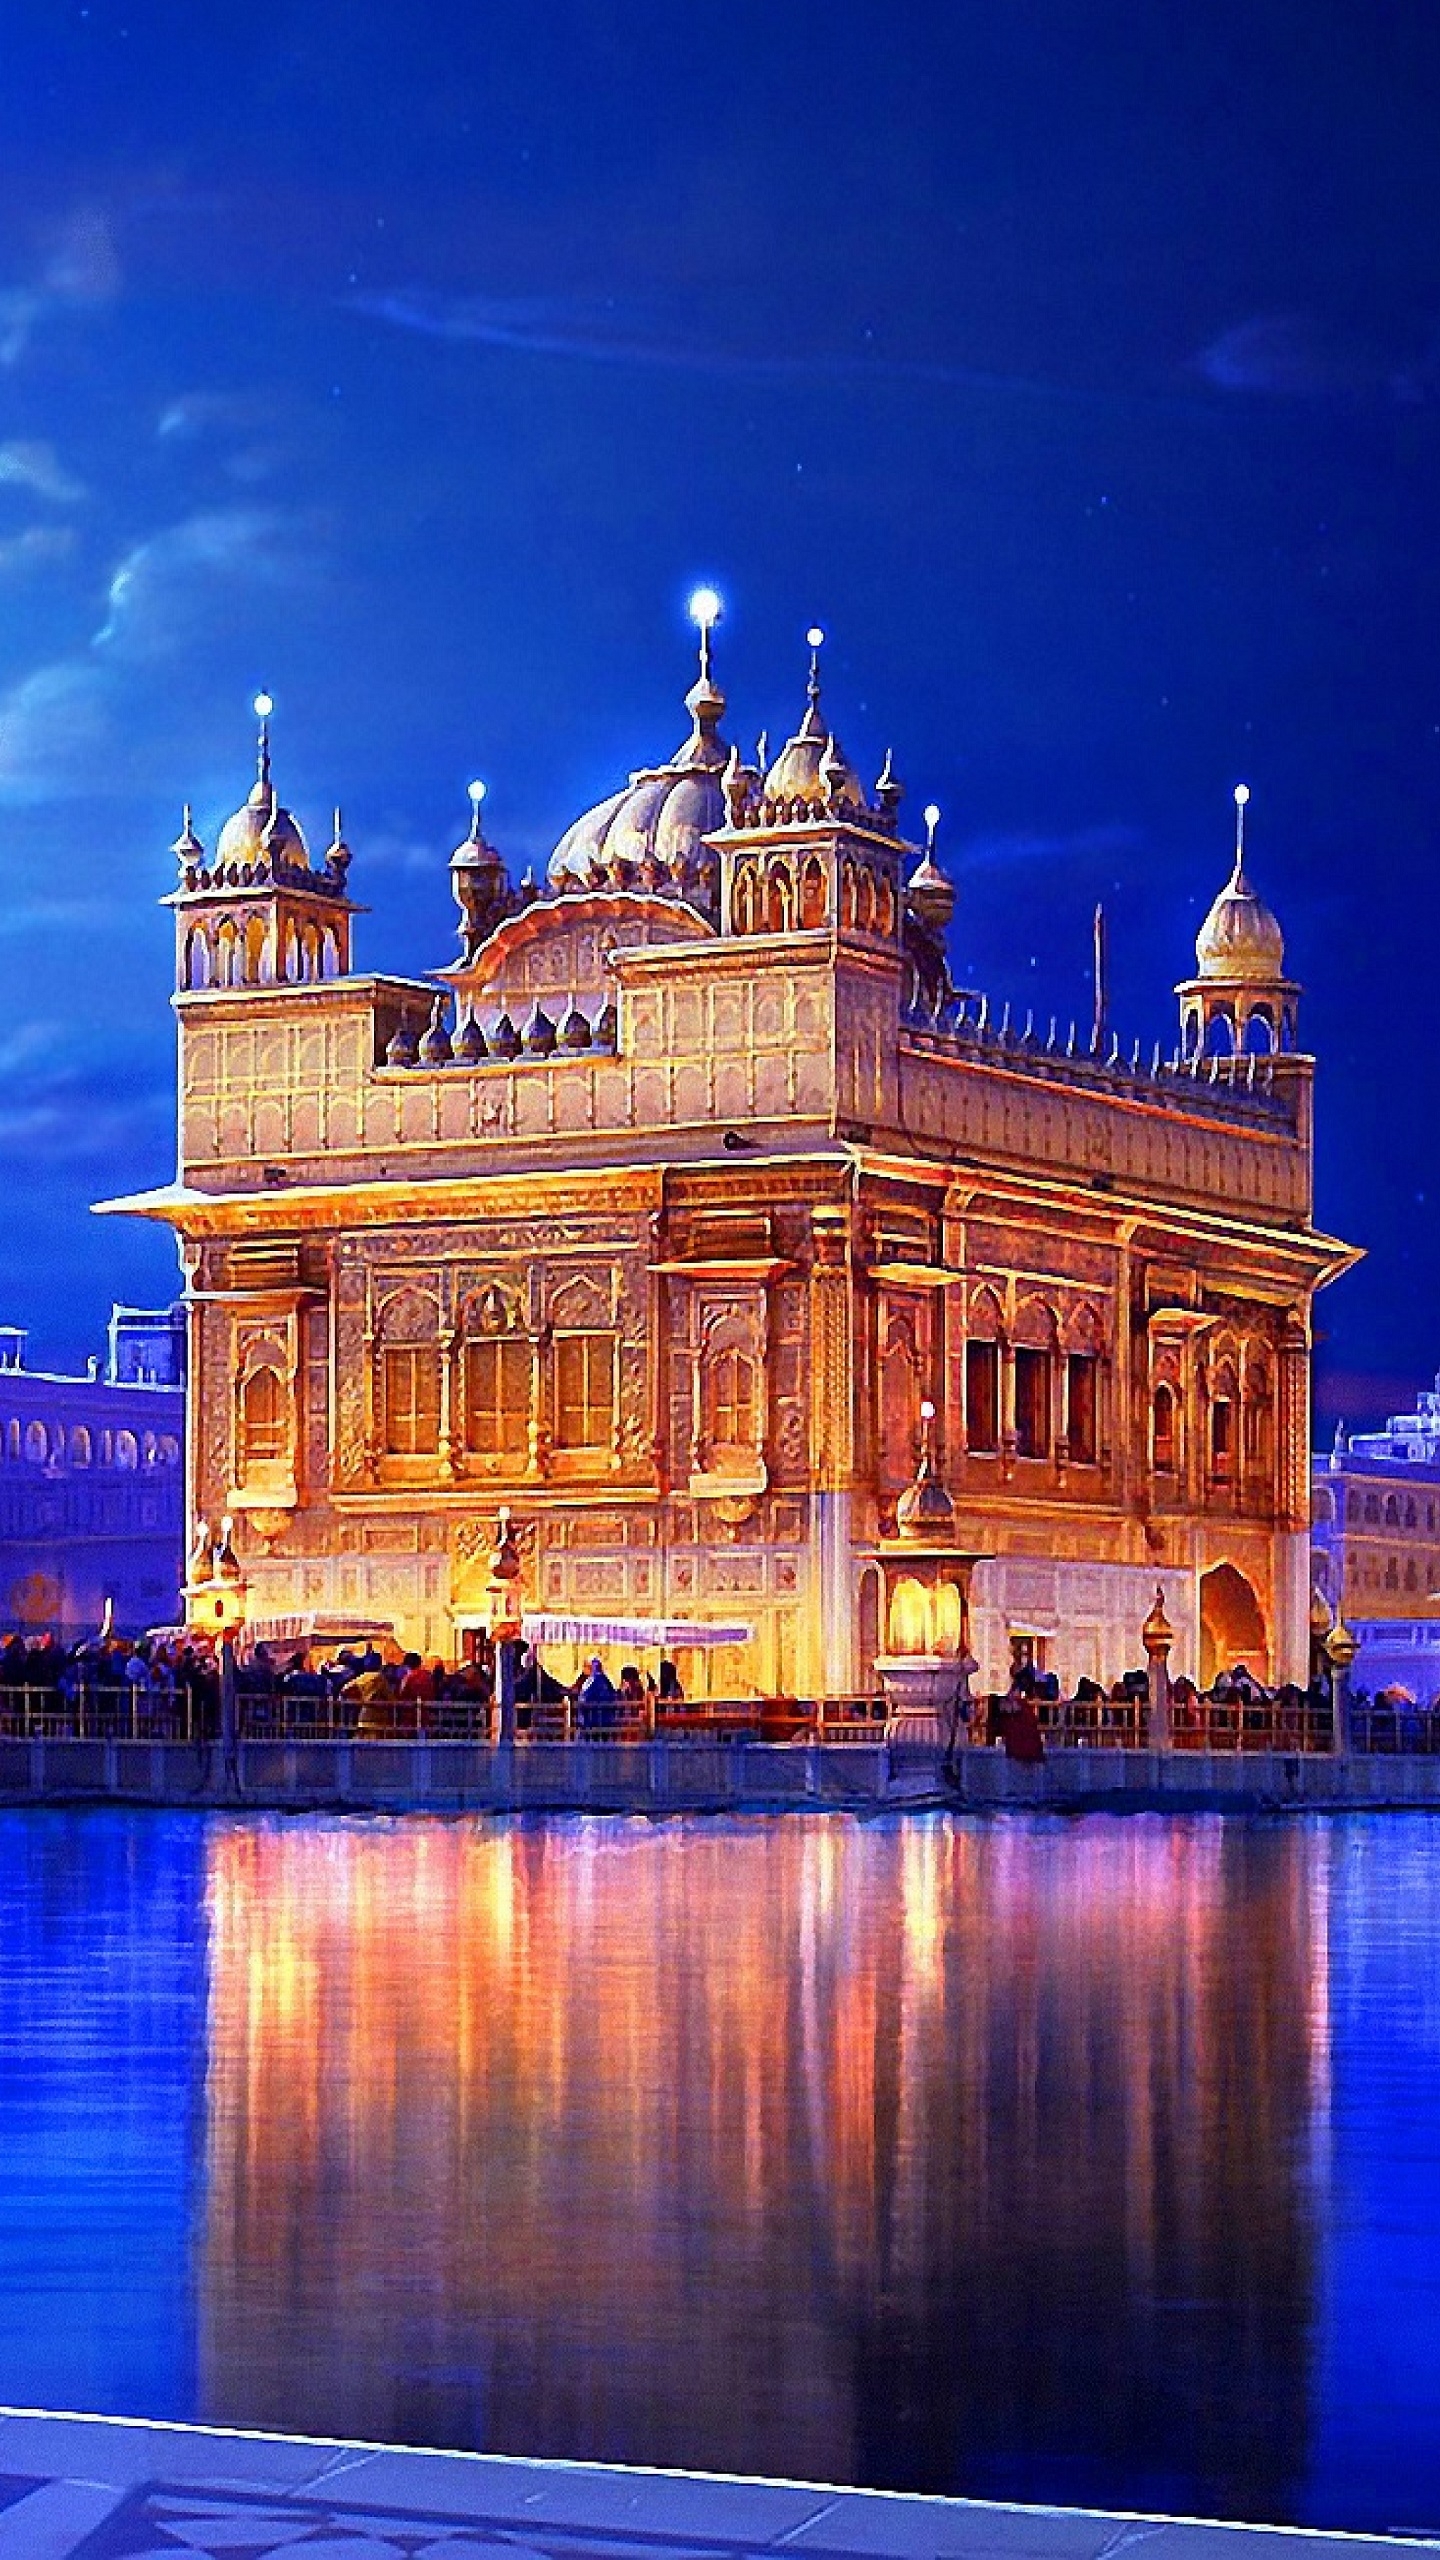 Golden Temple Amritsar India for Samsung S7 & S7 Edge resolution